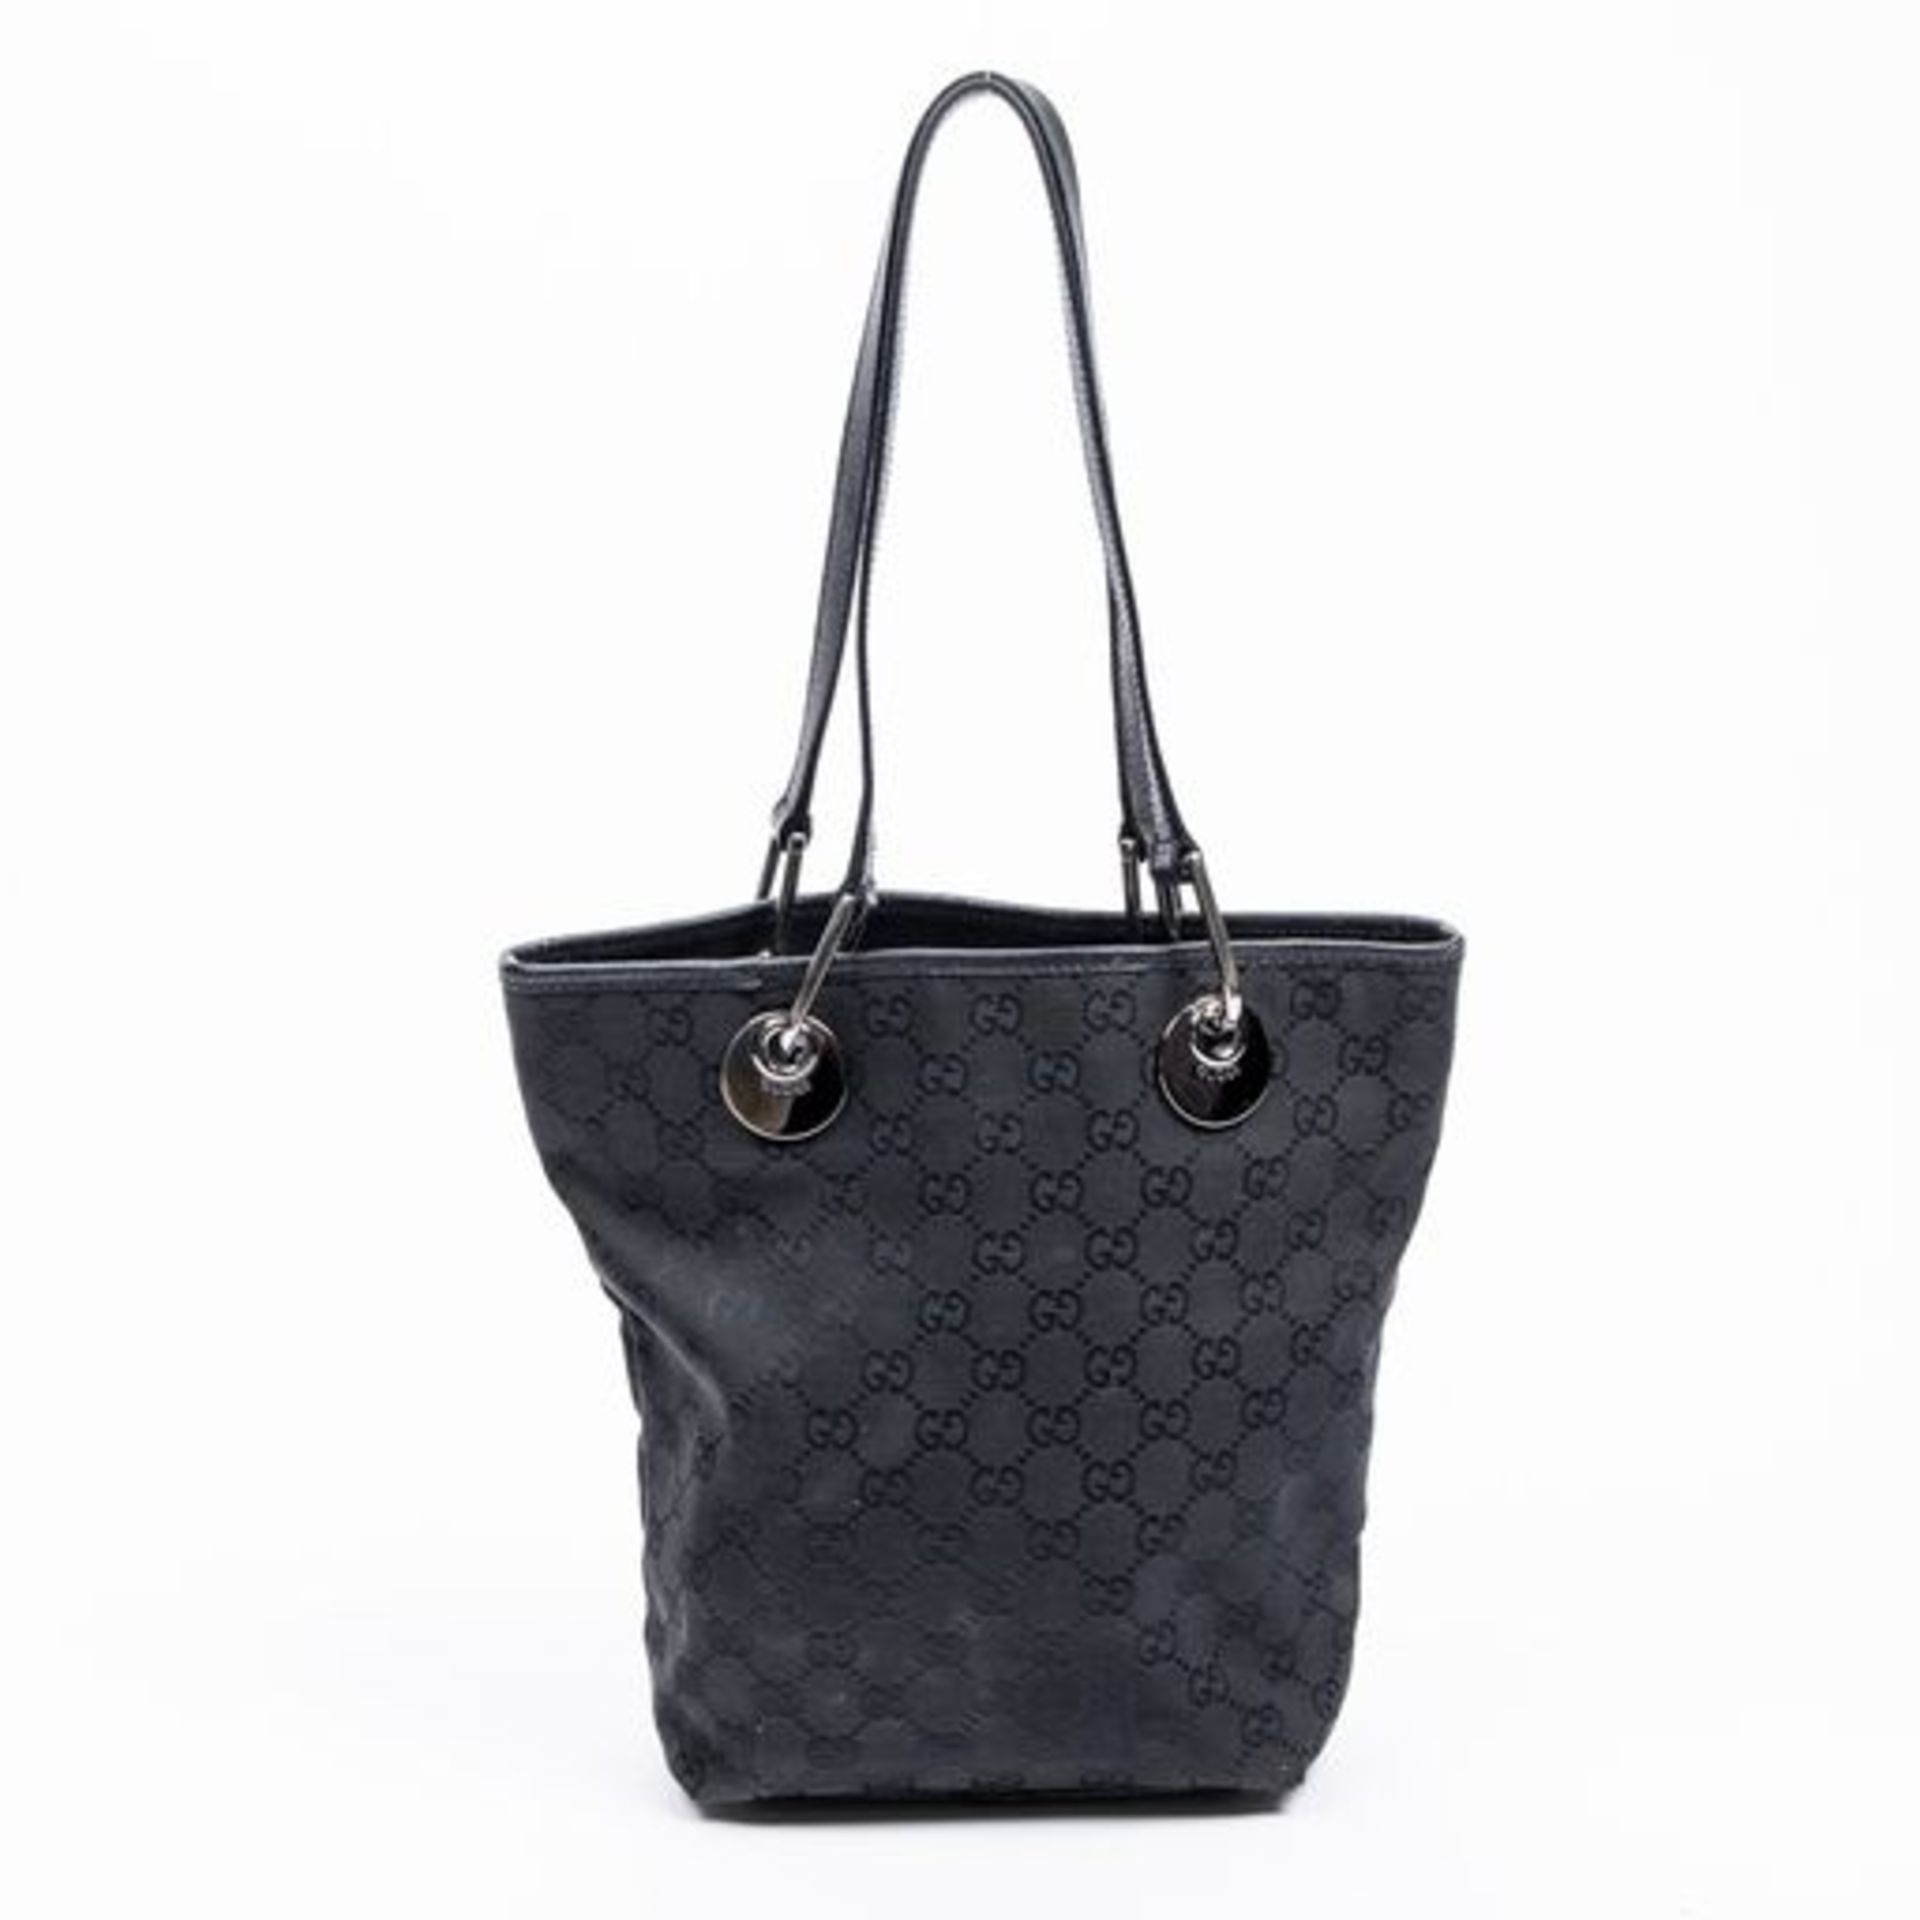 RRP £850 Gucci Eclipse Shopping Shoulder Bag Black - AAR0499 - Grade AB - (Bags Are Not On Site, - Image 4 of 7